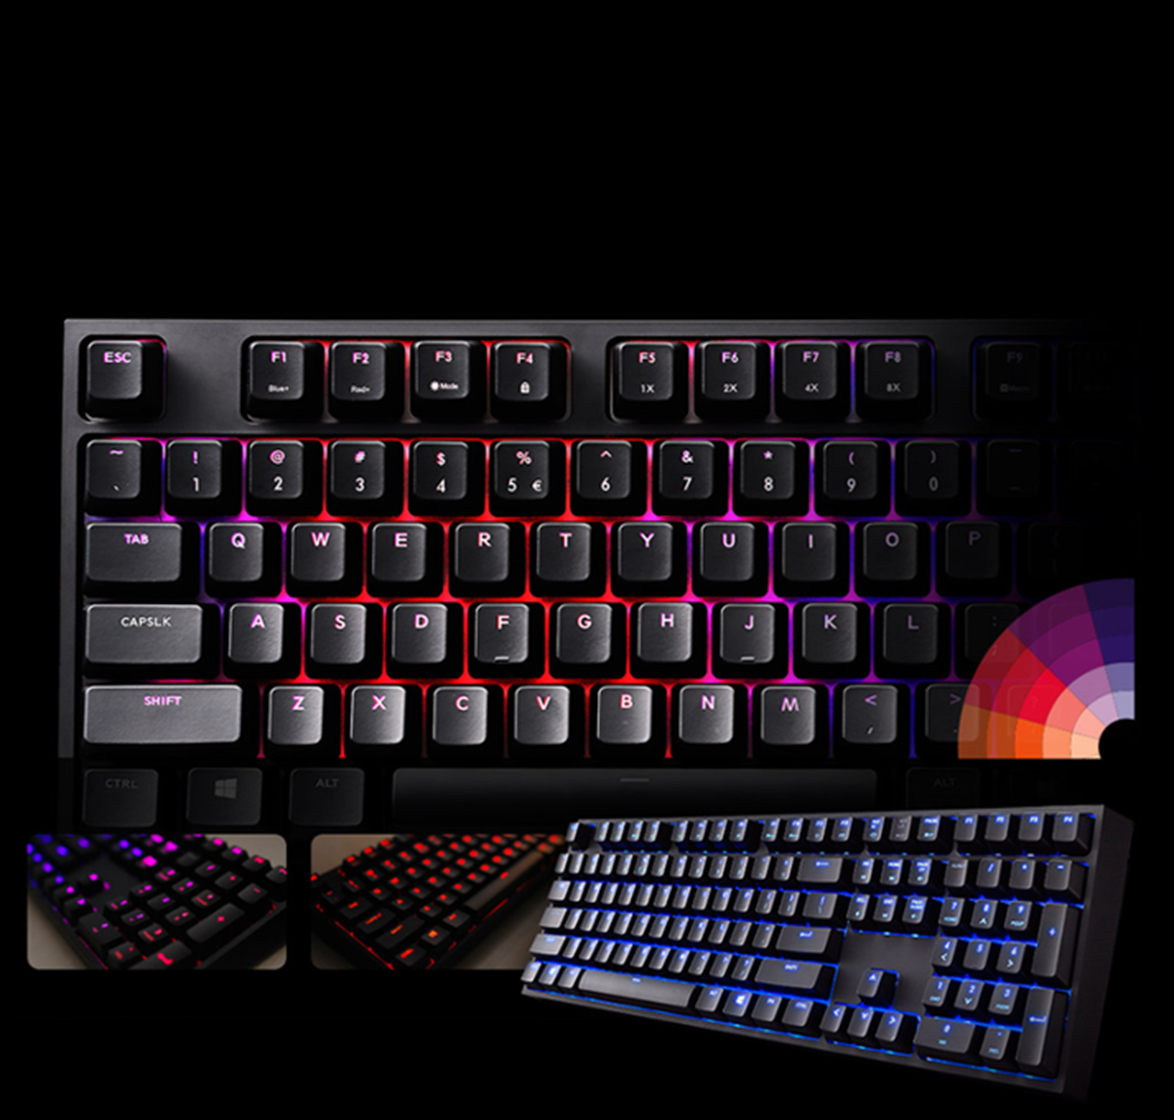 Multicolor per-key backlighting with built-in customization